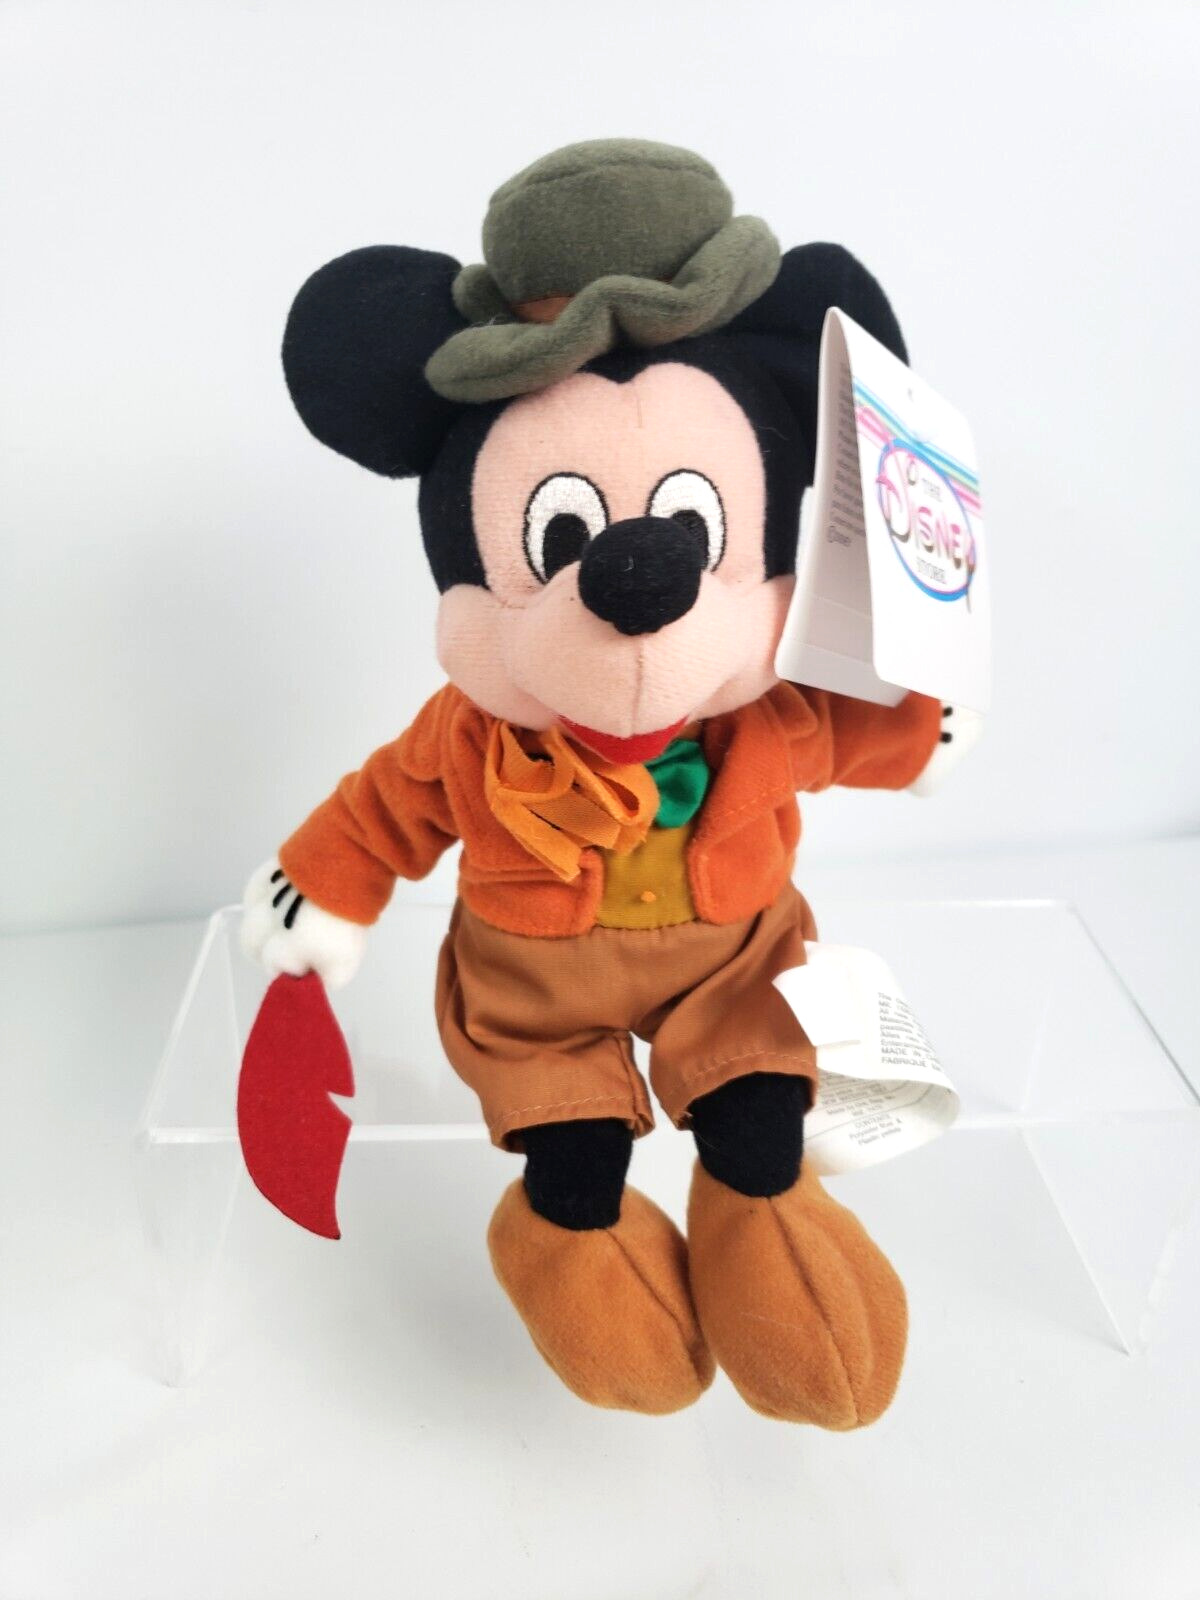 Disney Store Exclusive Bob Cratchit Mickey Mouse Mini Bean Bag Plush 9 in New